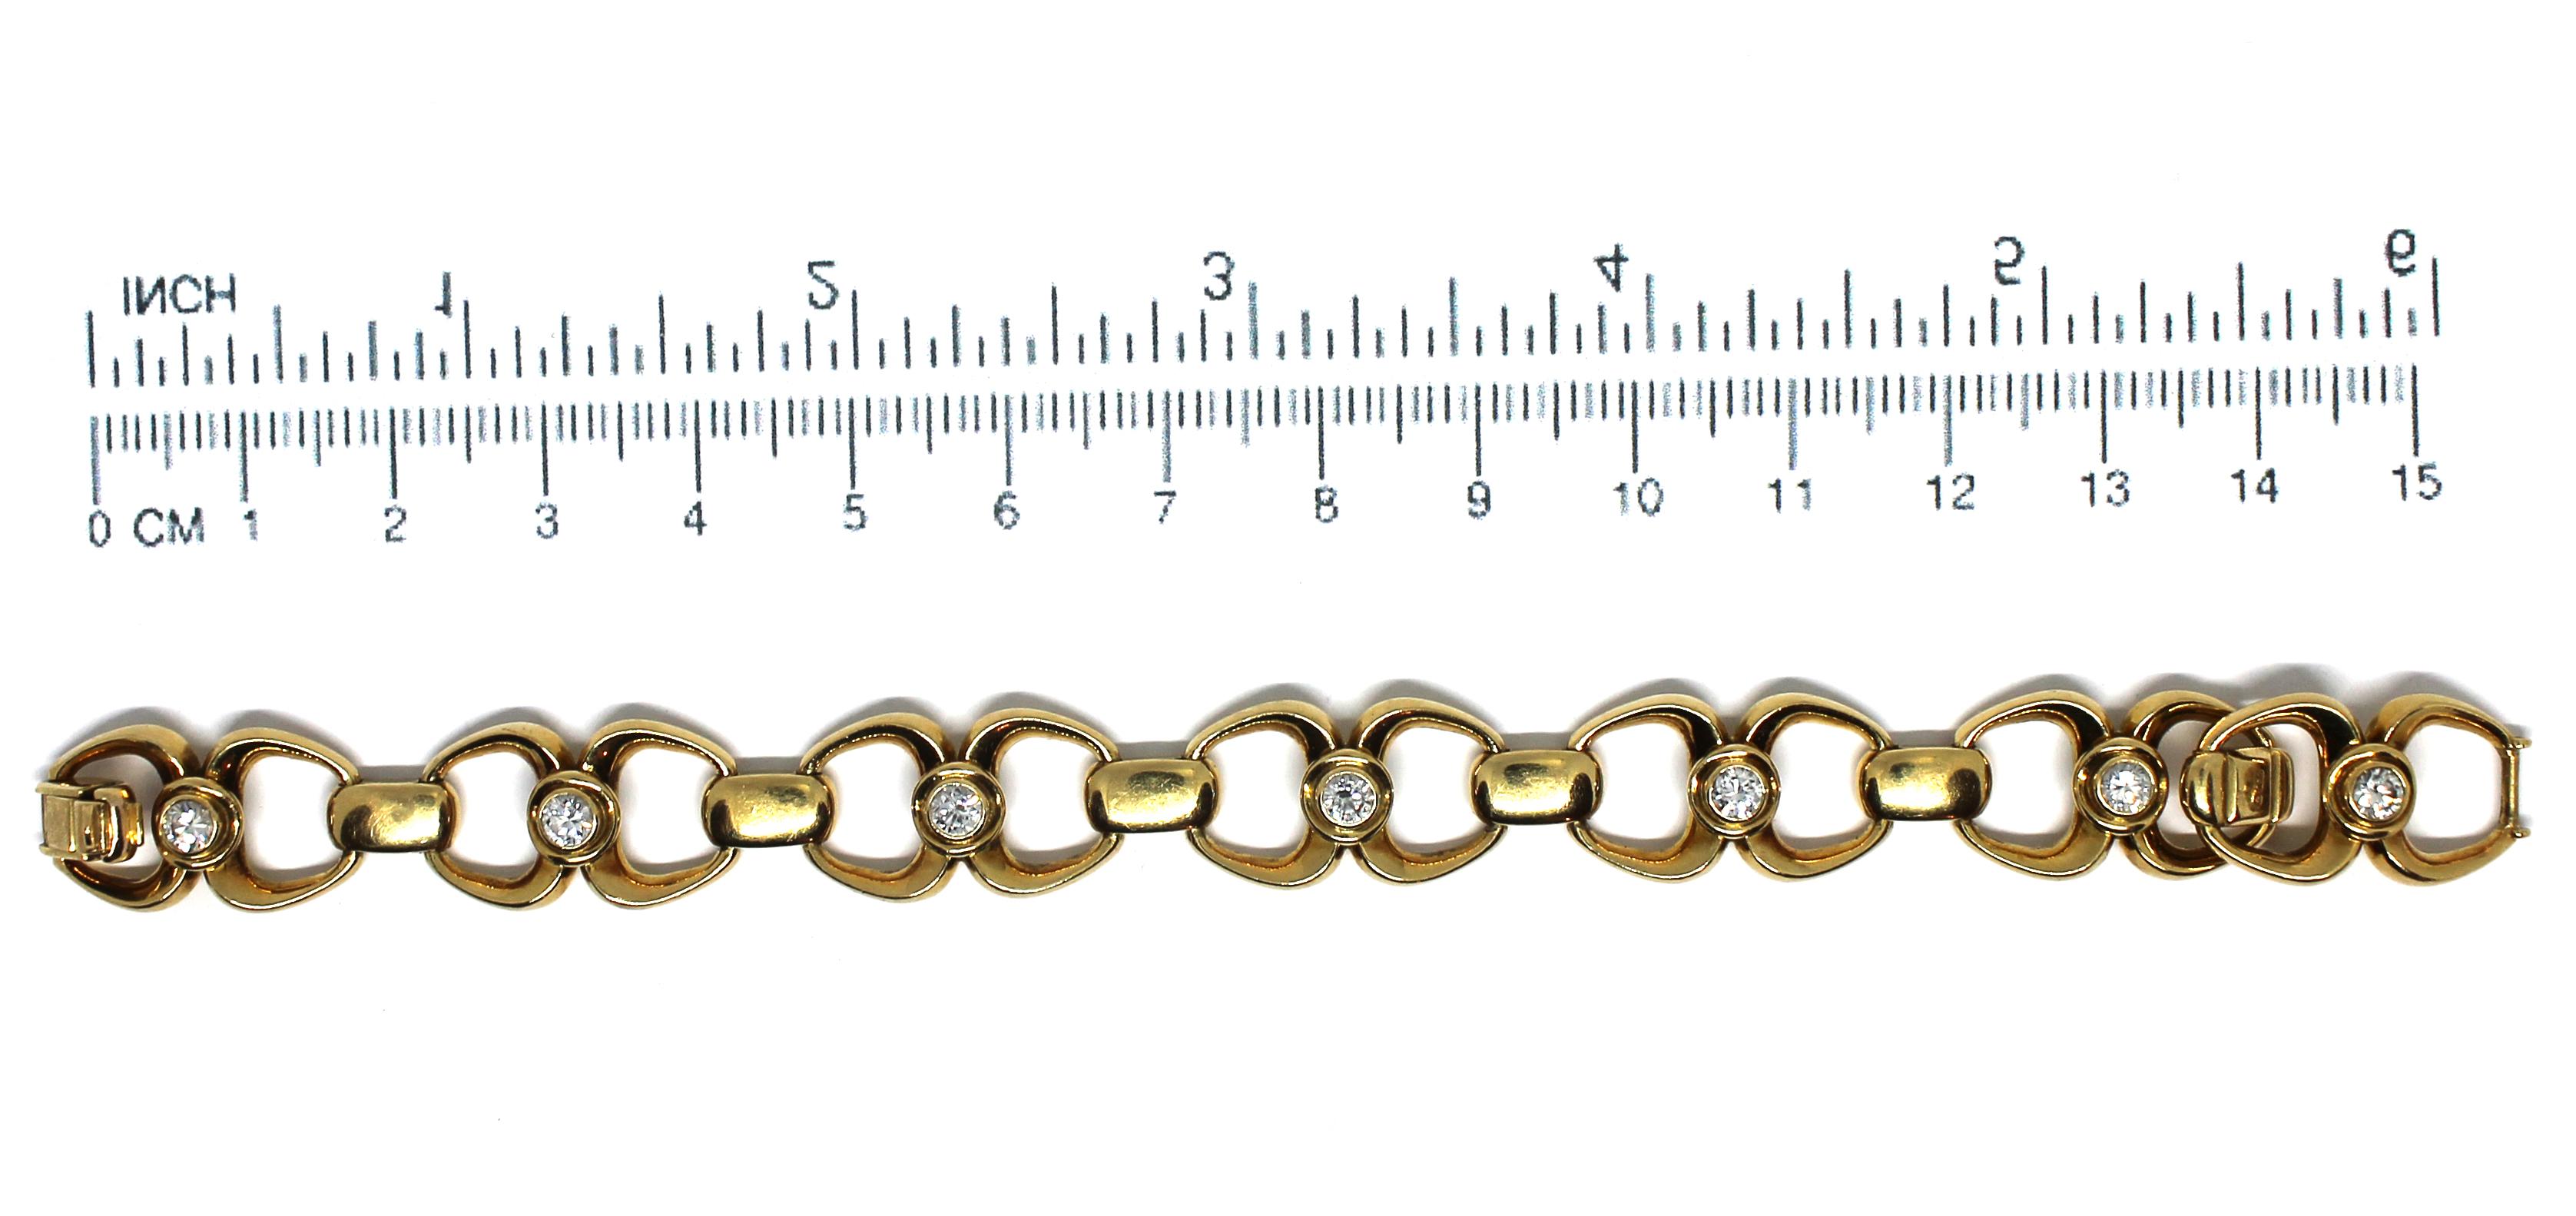 An elegant De Vroomen diamond & gold bracelet signed and dated 1979.  The uniform of series of 18 carat yellow gold fancy-links, accented by collet-set brilliant-cut diamonds, diamonds approx. 0.70ct total, maker's mark LDV, London hallmark, length